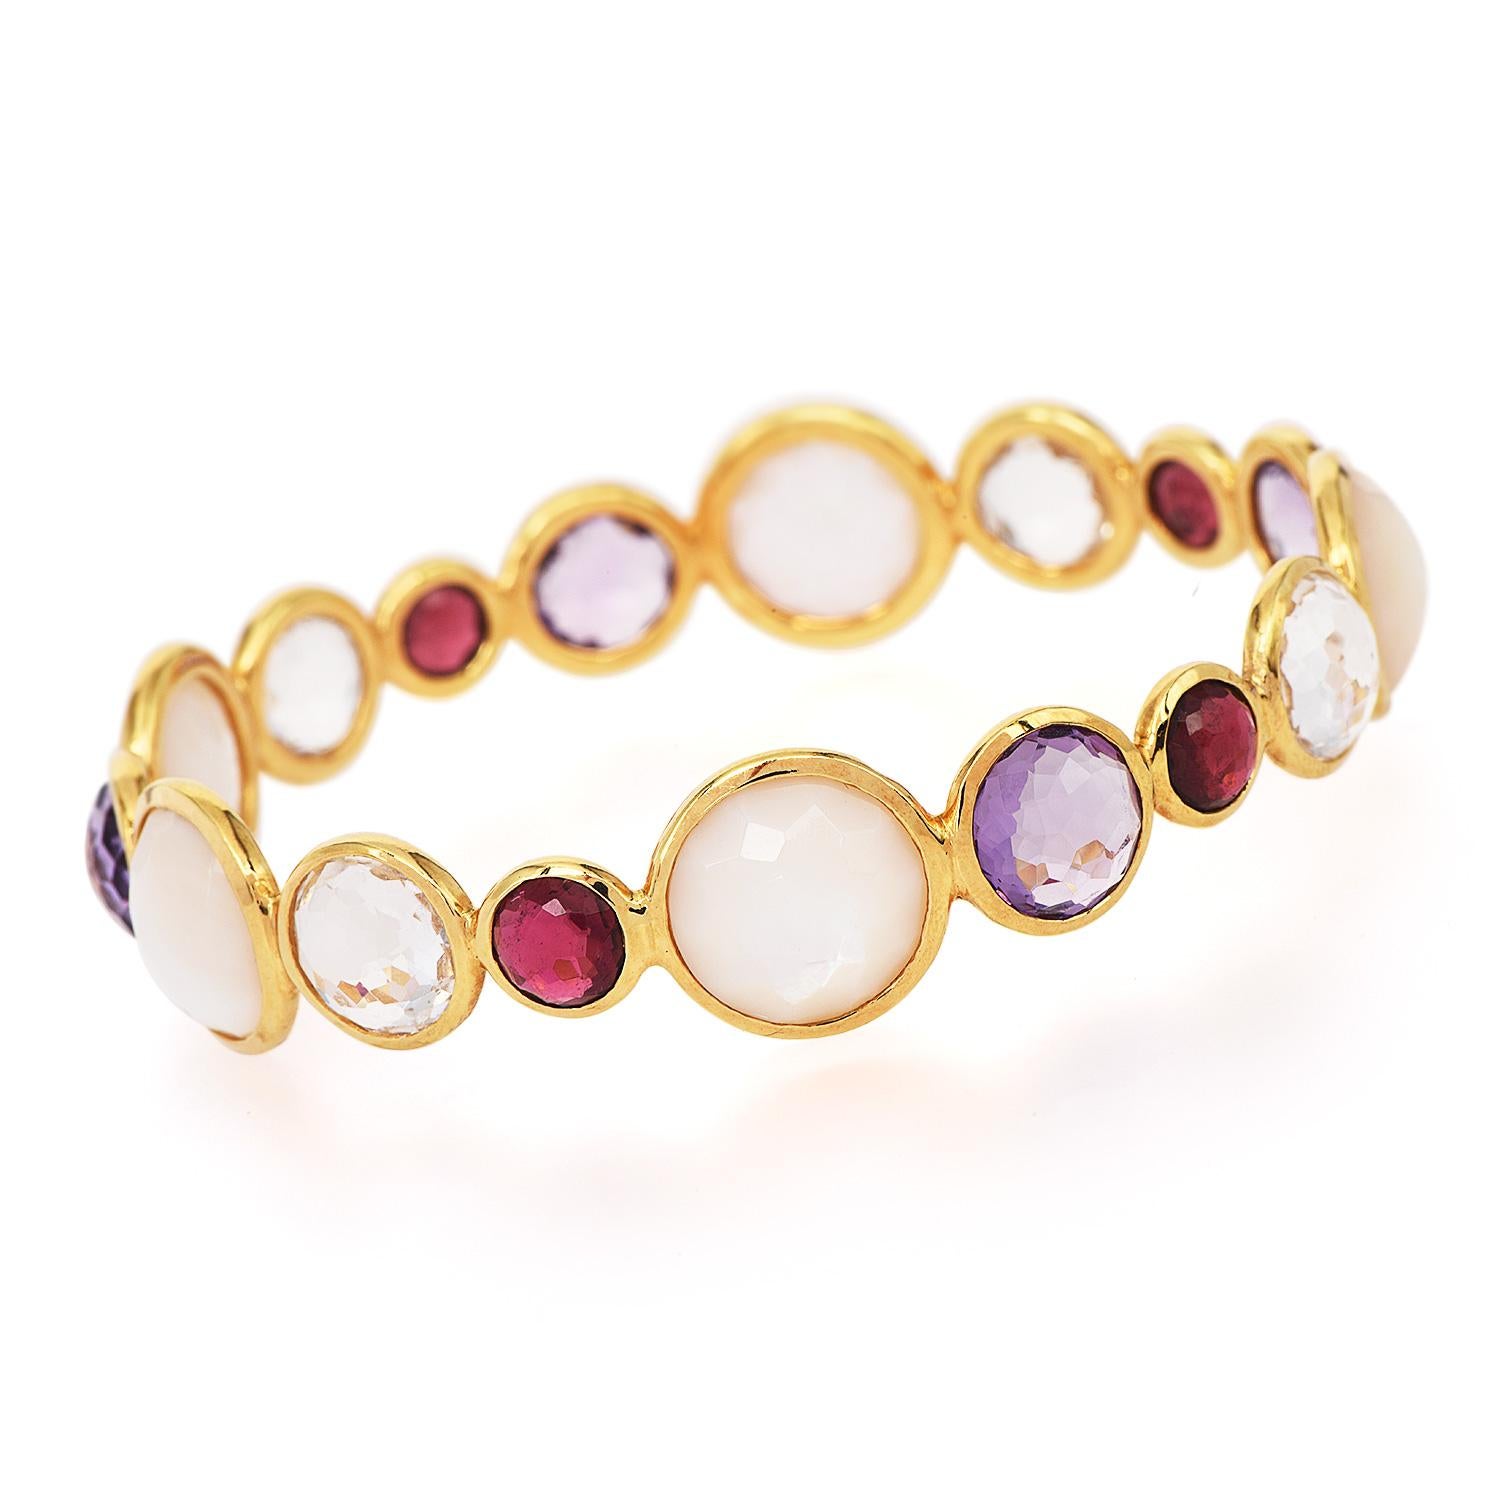 Playful and colorful Ippoita Bangle bracelet, from the Rock Candy Collection.

Expertly crafted in solid 18K Yellow Gold.

A beaded design with multicolor gemstones, presenting Rock Crystal, Mother-of-Pearl, Amethyst,  Aquamarine, and